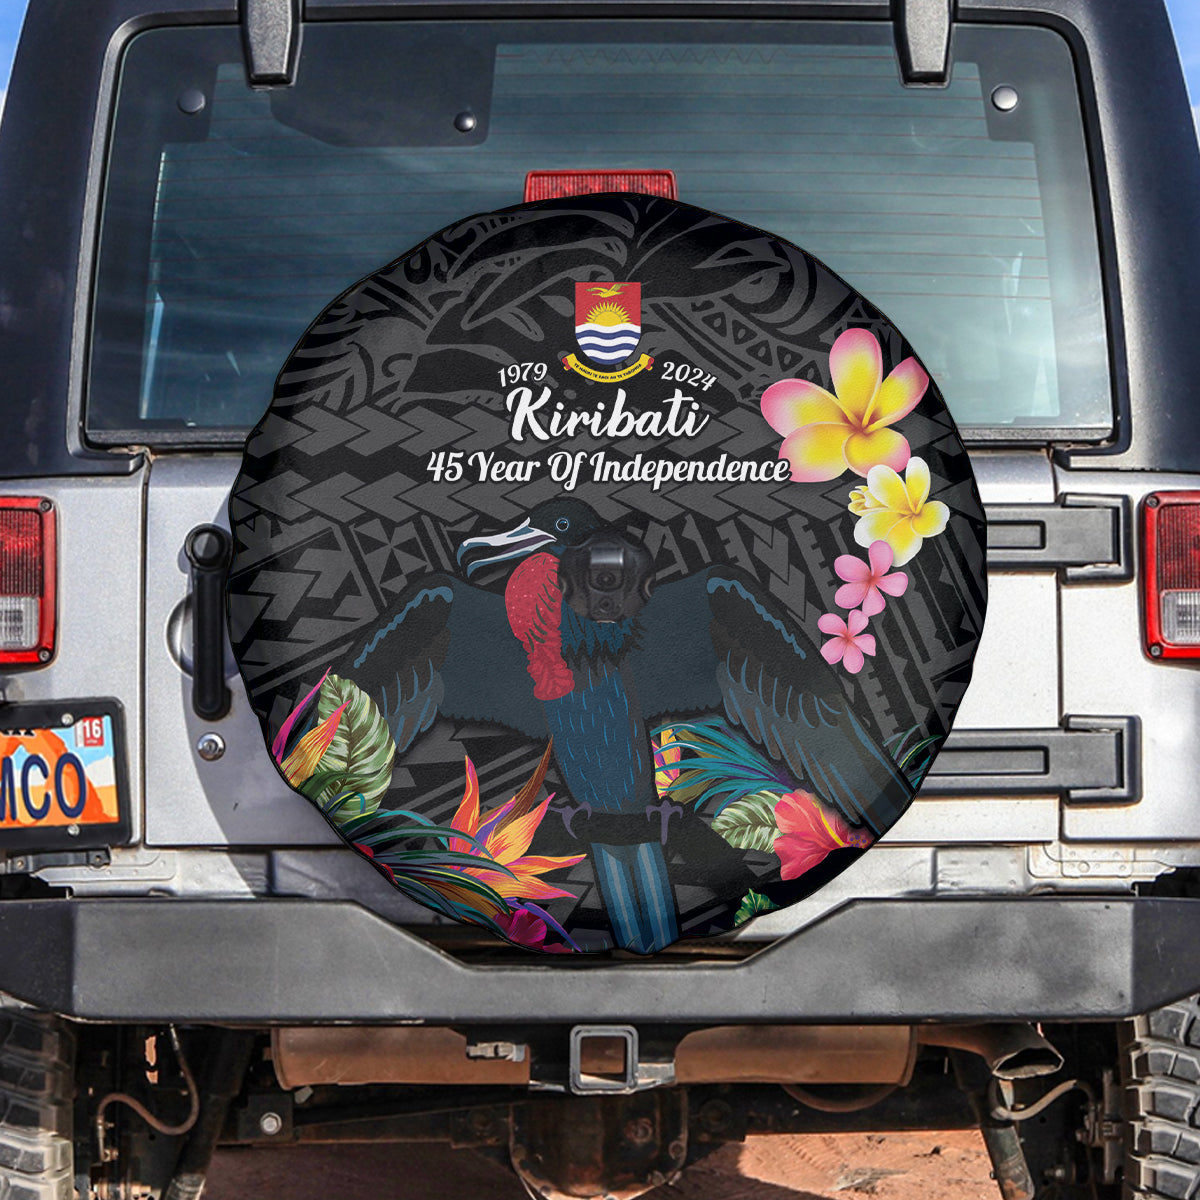 Kiribati Independence Day Spare Tire Cover Frigatebird Mix Tropical Flowers - Black Style